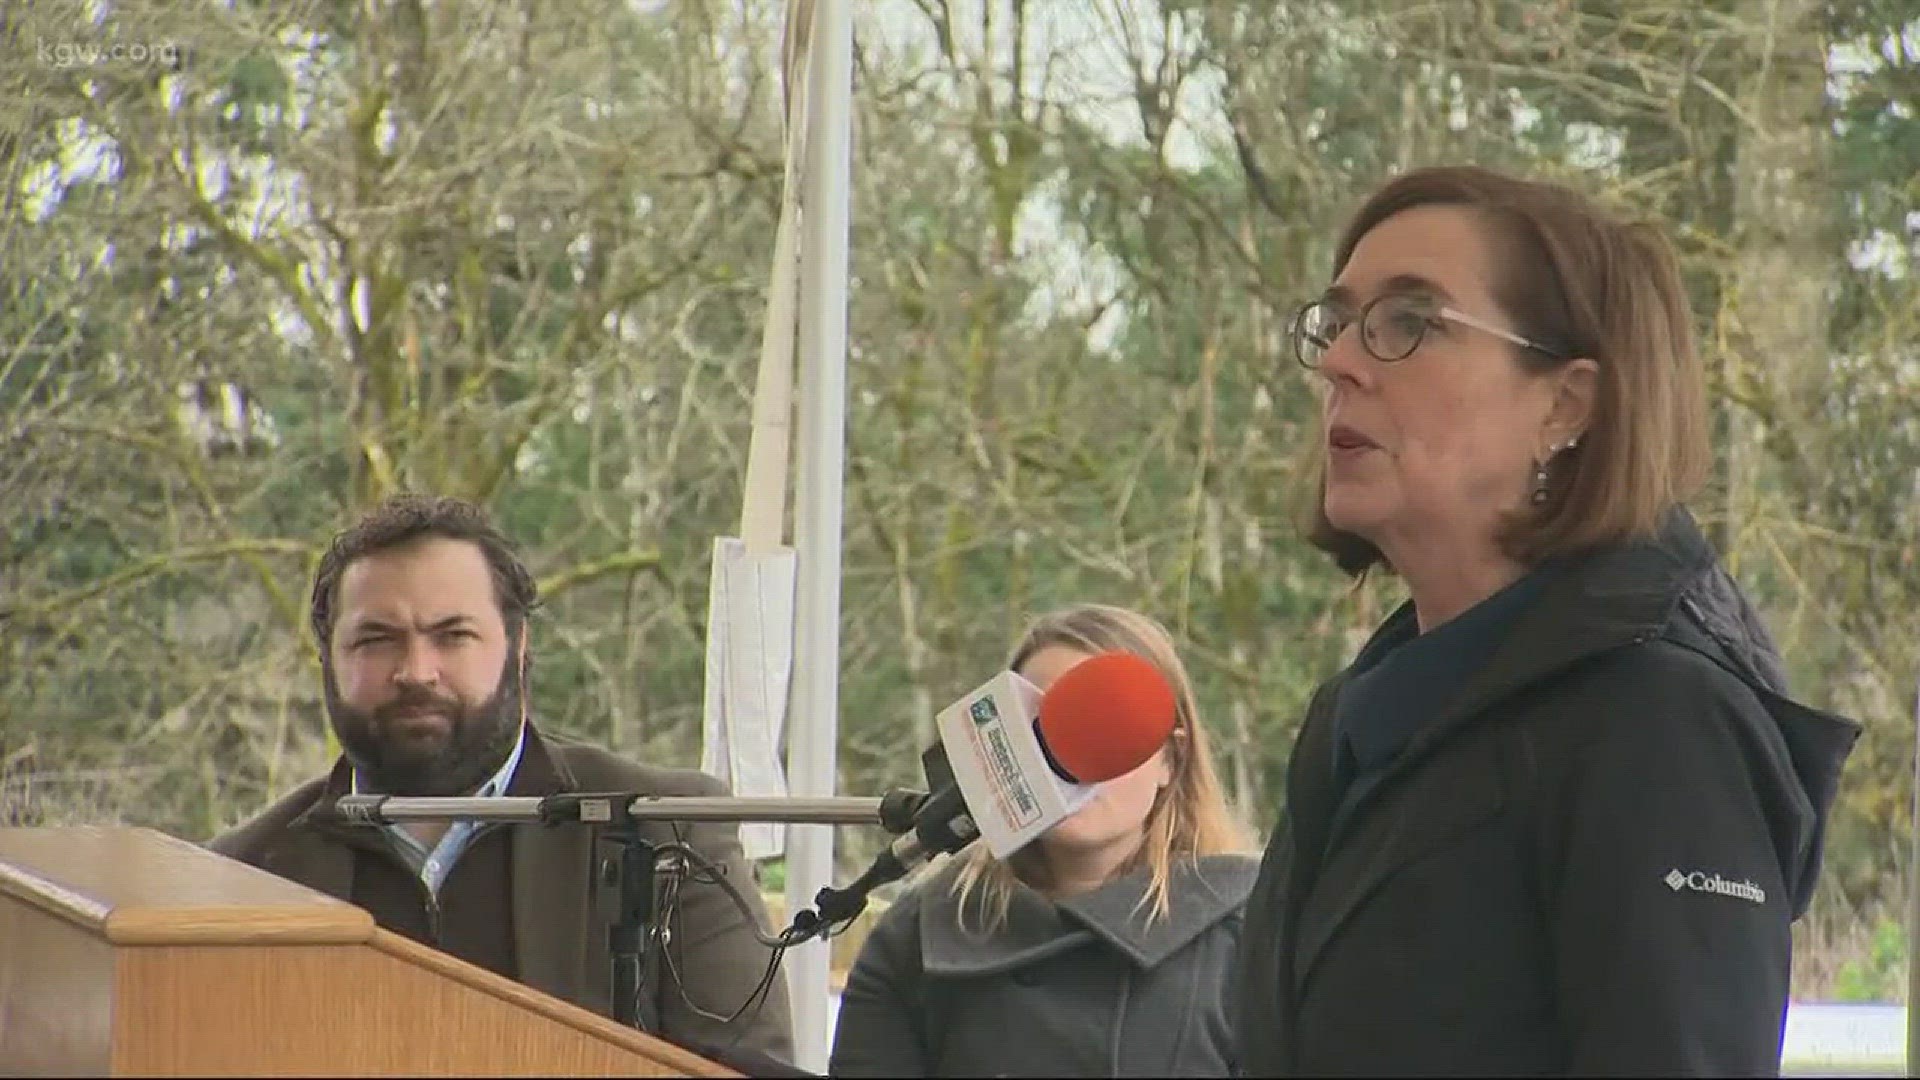 Oregon Gov. Kate Brown said Oregon will support the state of Washington after the Amtrak derailment